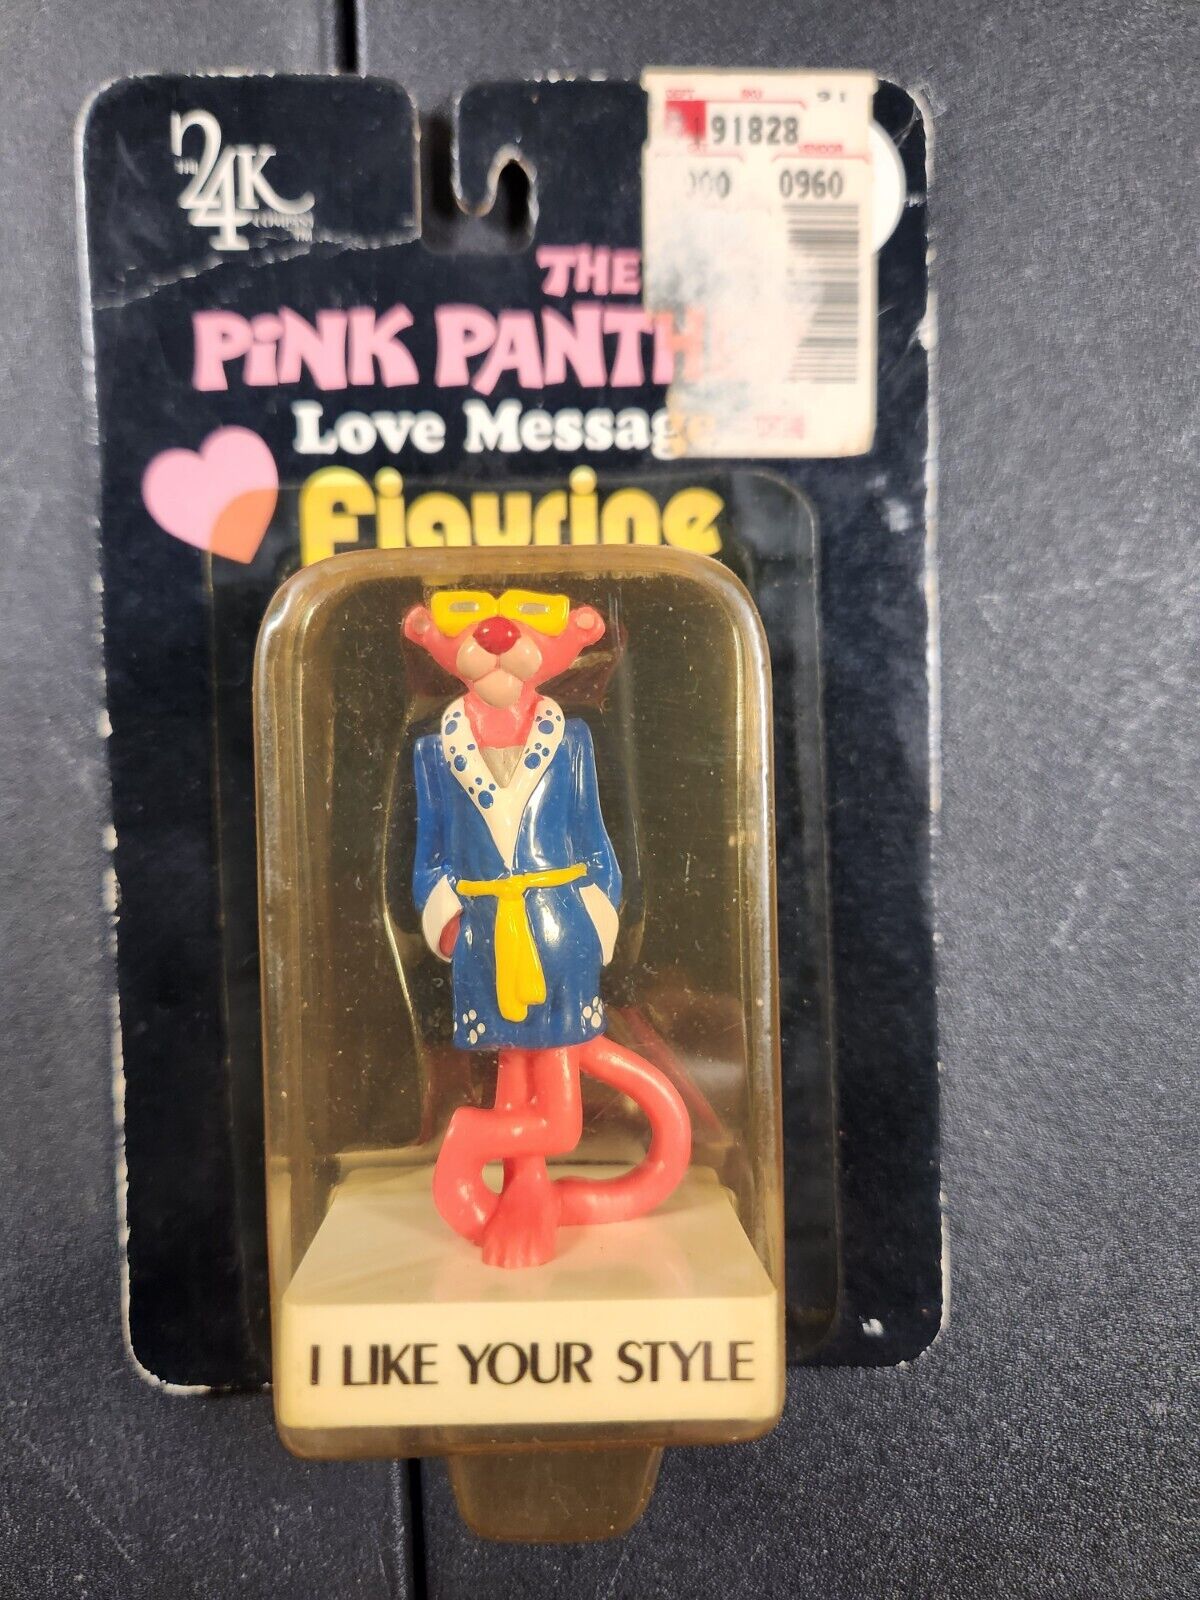 The Pink Panther Love Message Figurine, I Like Your Style vintage 1989